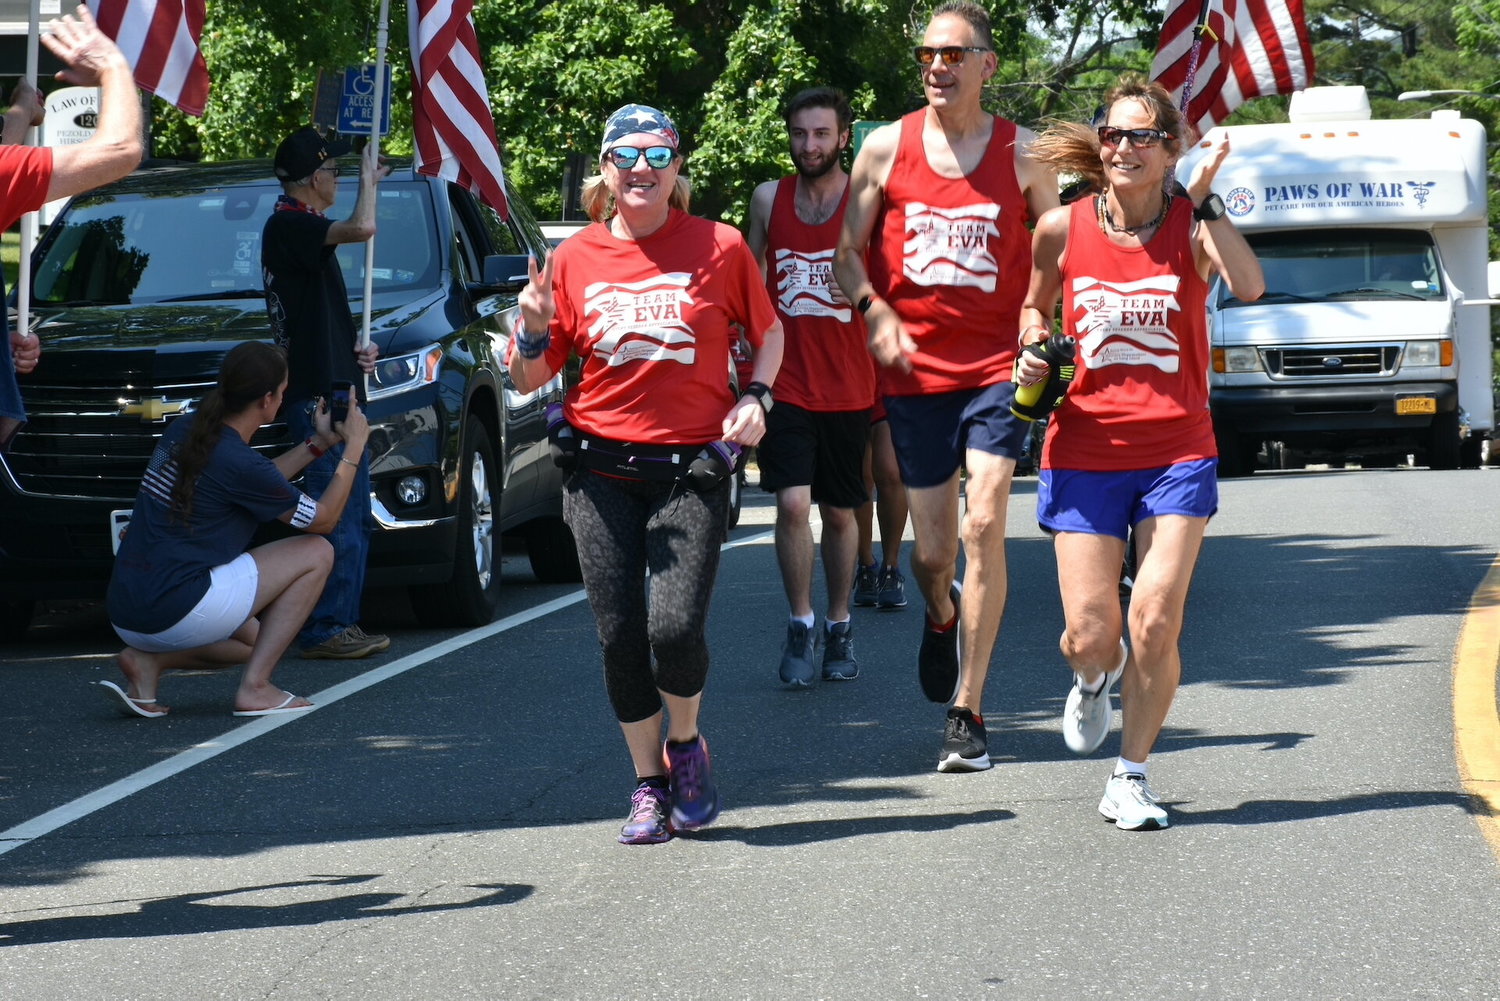 Ultramarathon runner Eva Casale (pictured waving on right), with the support of her Team E.V.A., will be completing seven marathons (over 184 miles) in seven days to raise funds and awareness to support veterans. 